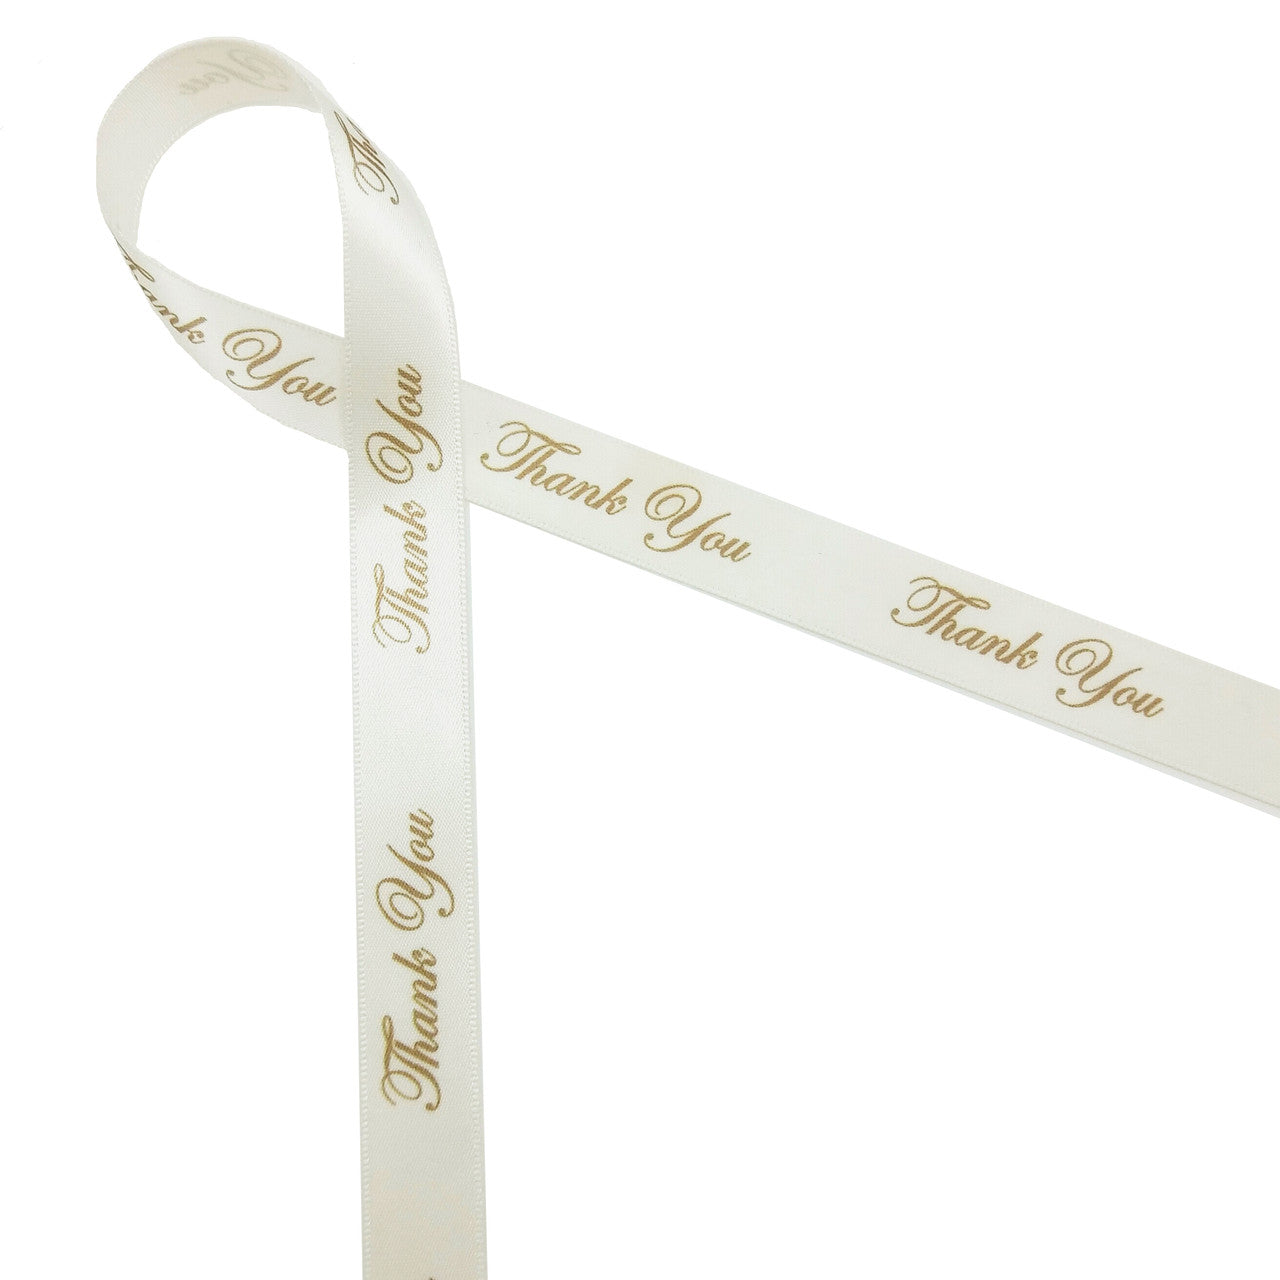 Thank you in champagne ink on 5/8" Antique White Satin Ribbon, 10 Yards